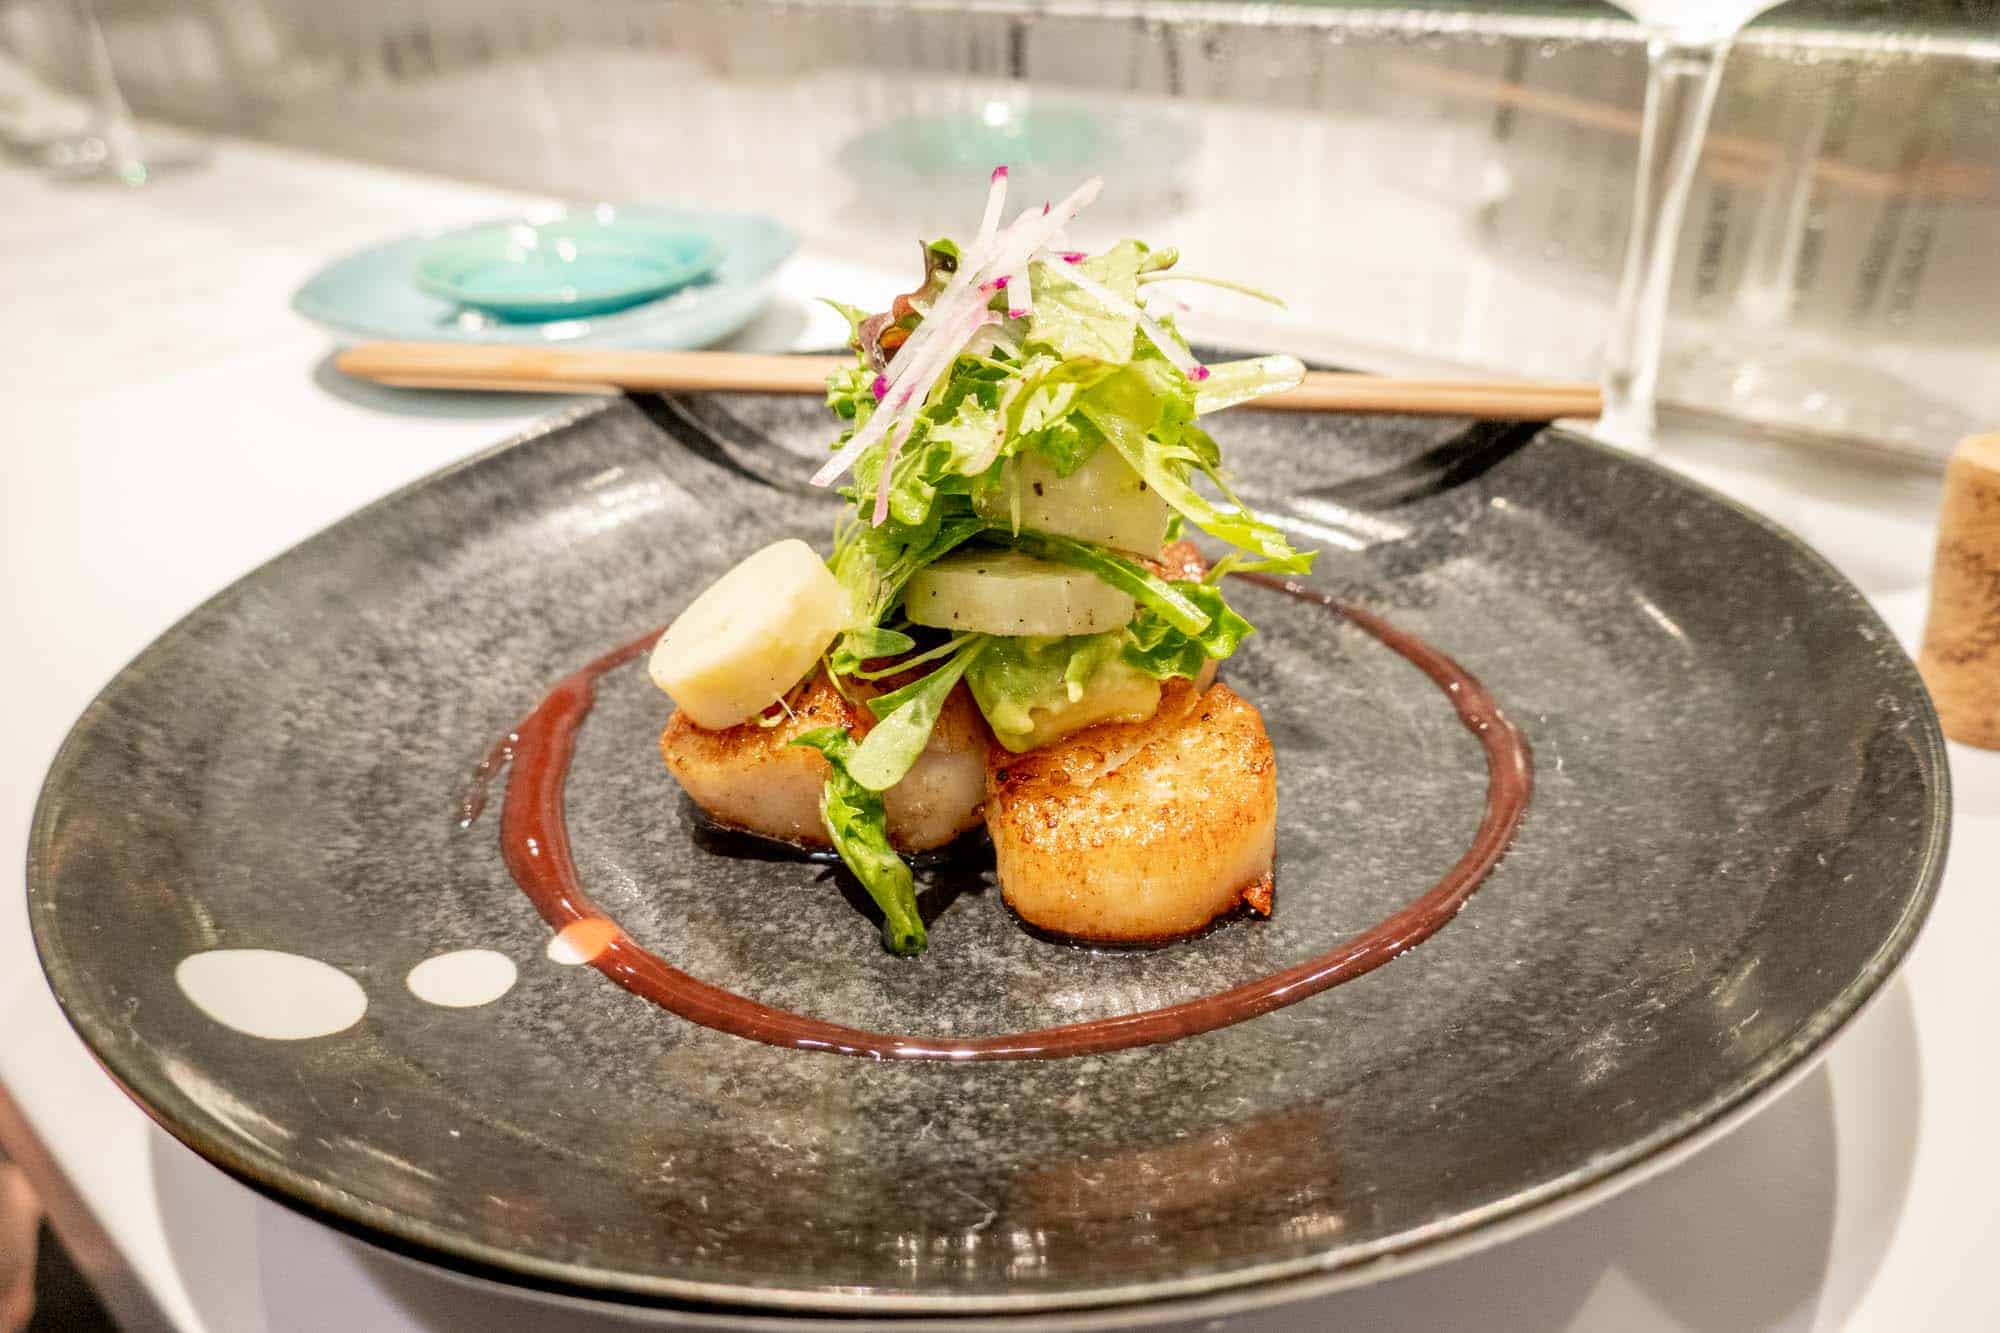 Scallops topped with a salad on a black plate with chopsticks